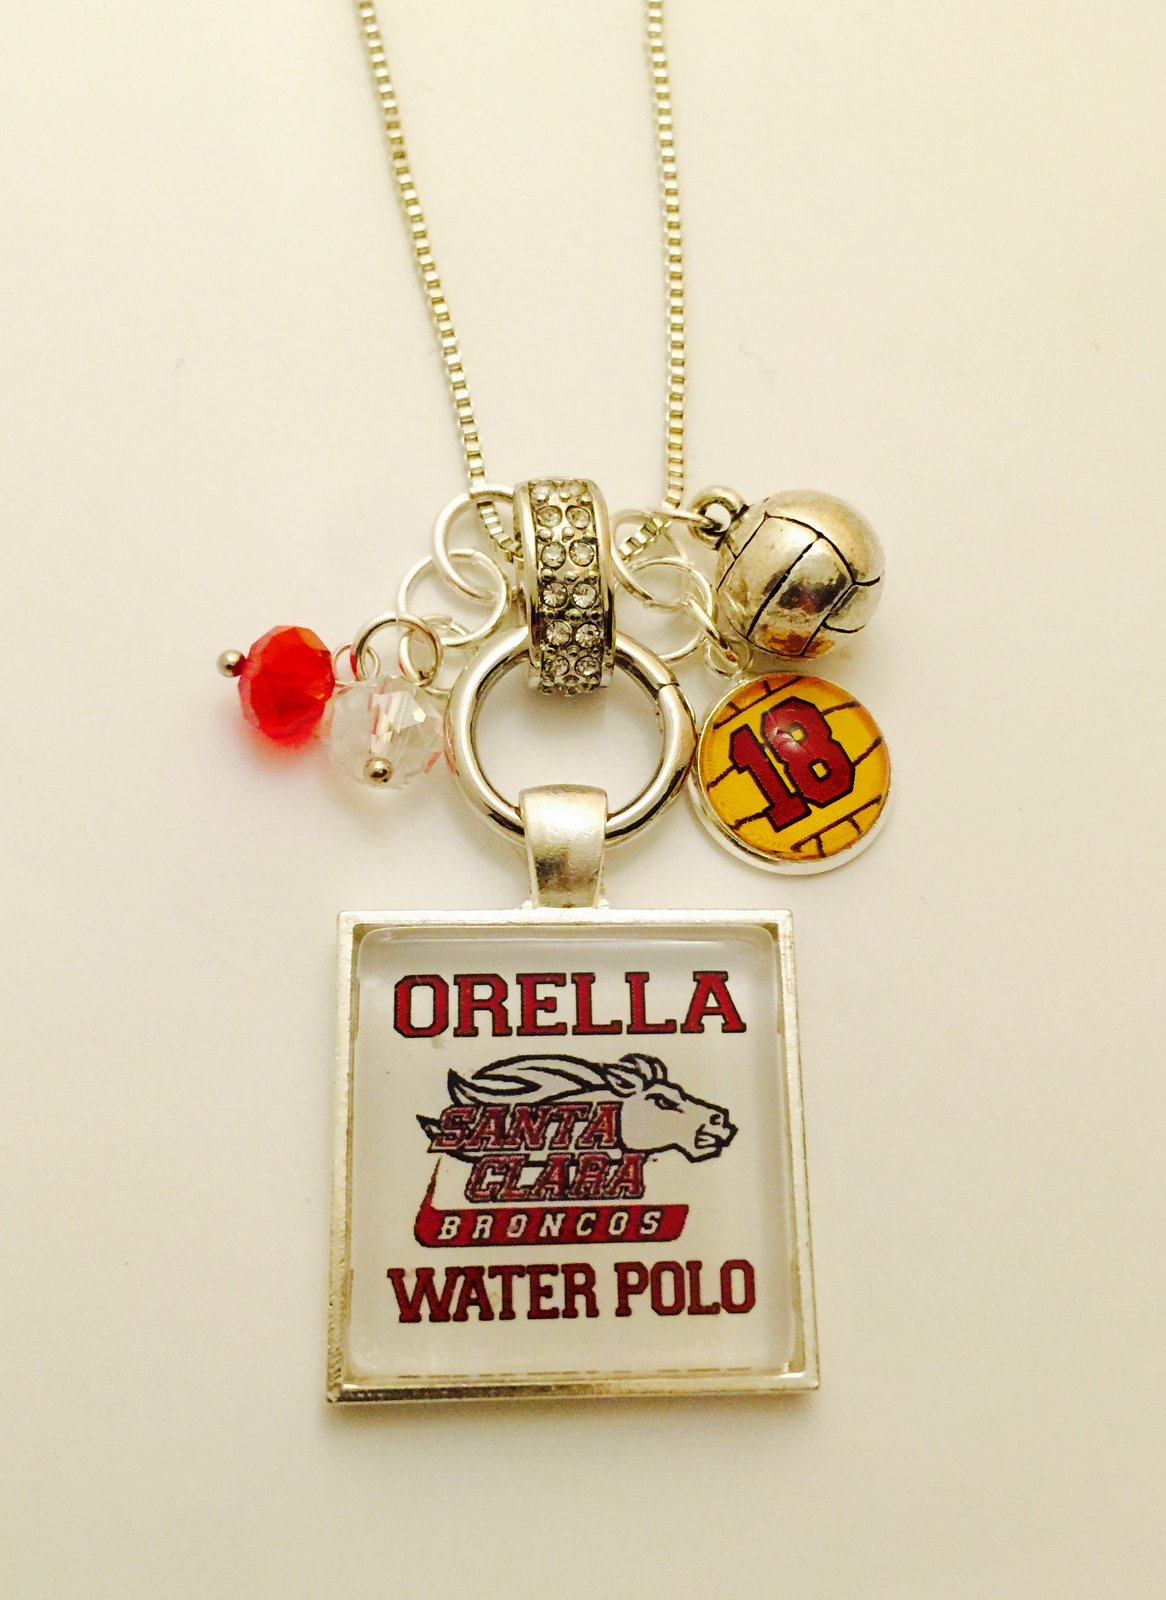 Water Polo Charm Waterpolo Team Gifts Waterpolo Charm Water Polo Team Gifts Waterpolo Gifts Waterpolo Necklace Water Polo Necklace